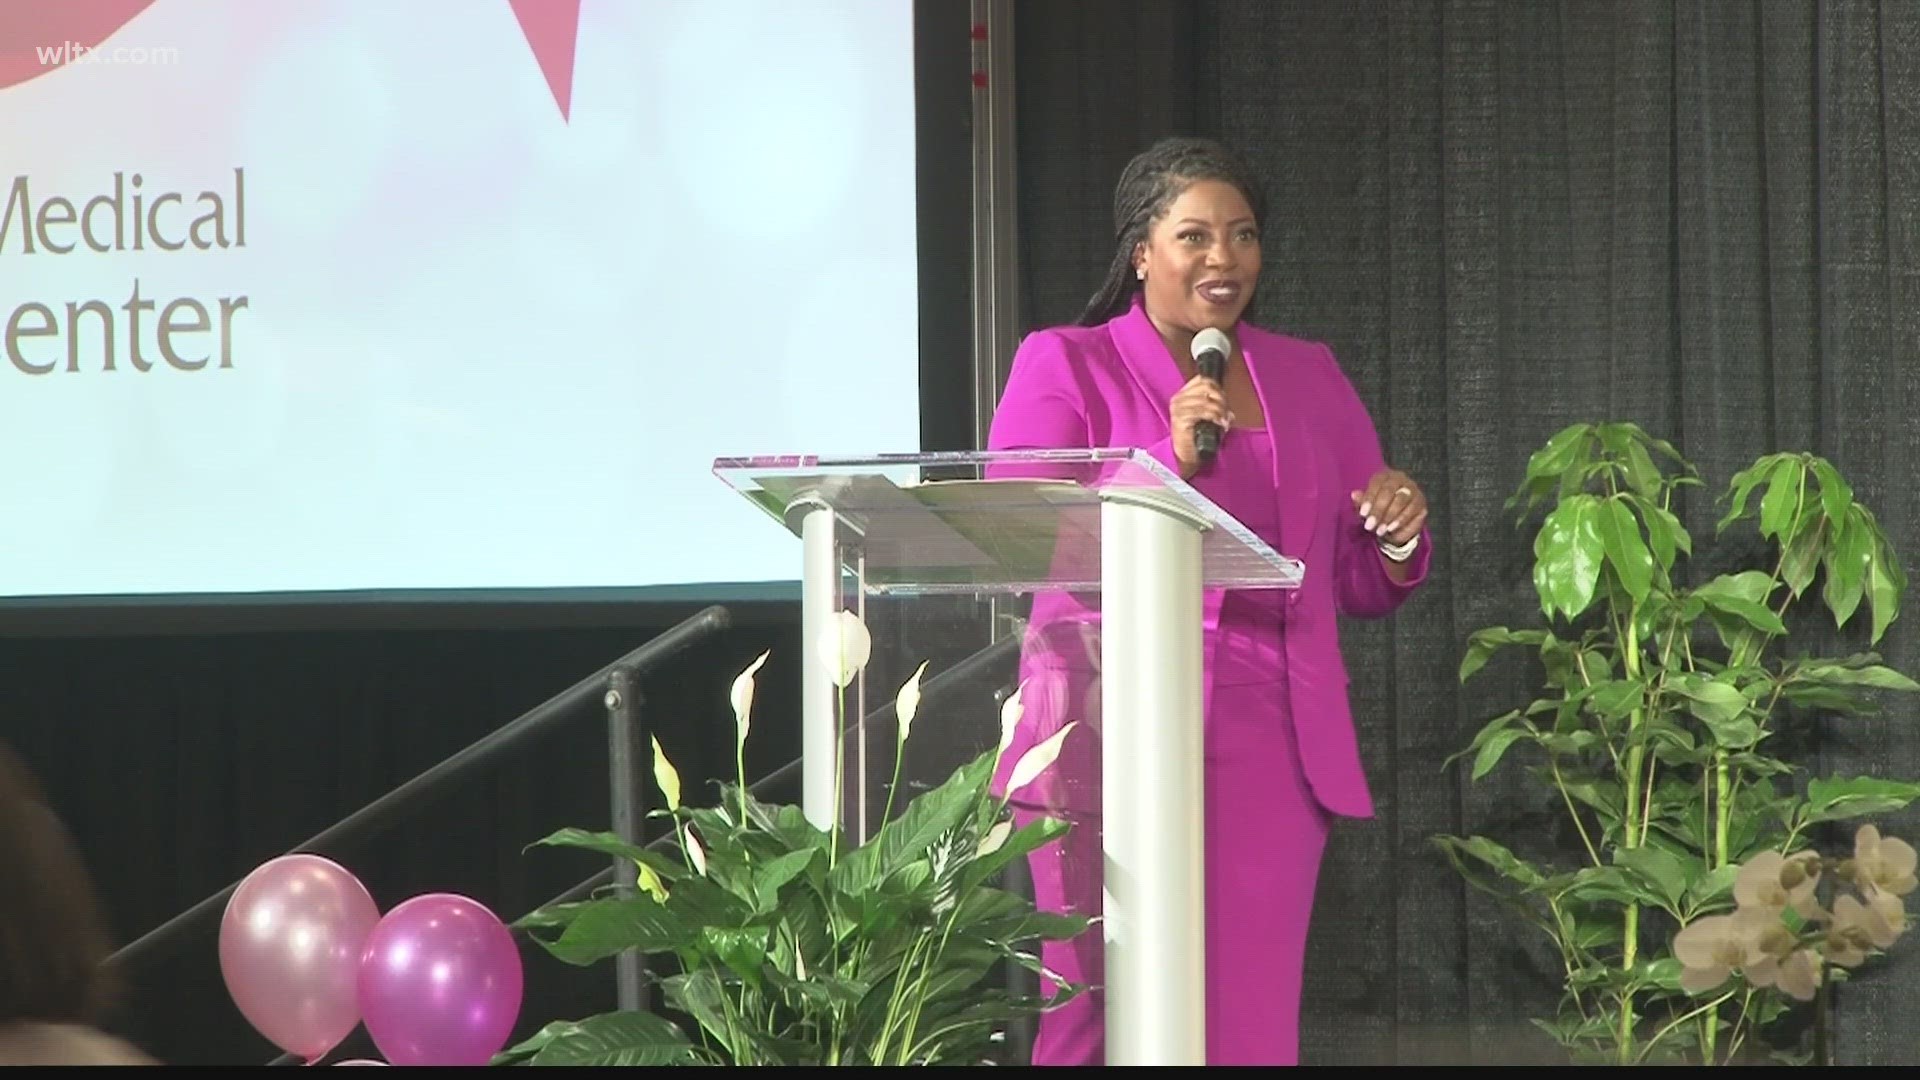 The event featured speakers and a fashion show-WLTX's Darci Strickland was the emcee.